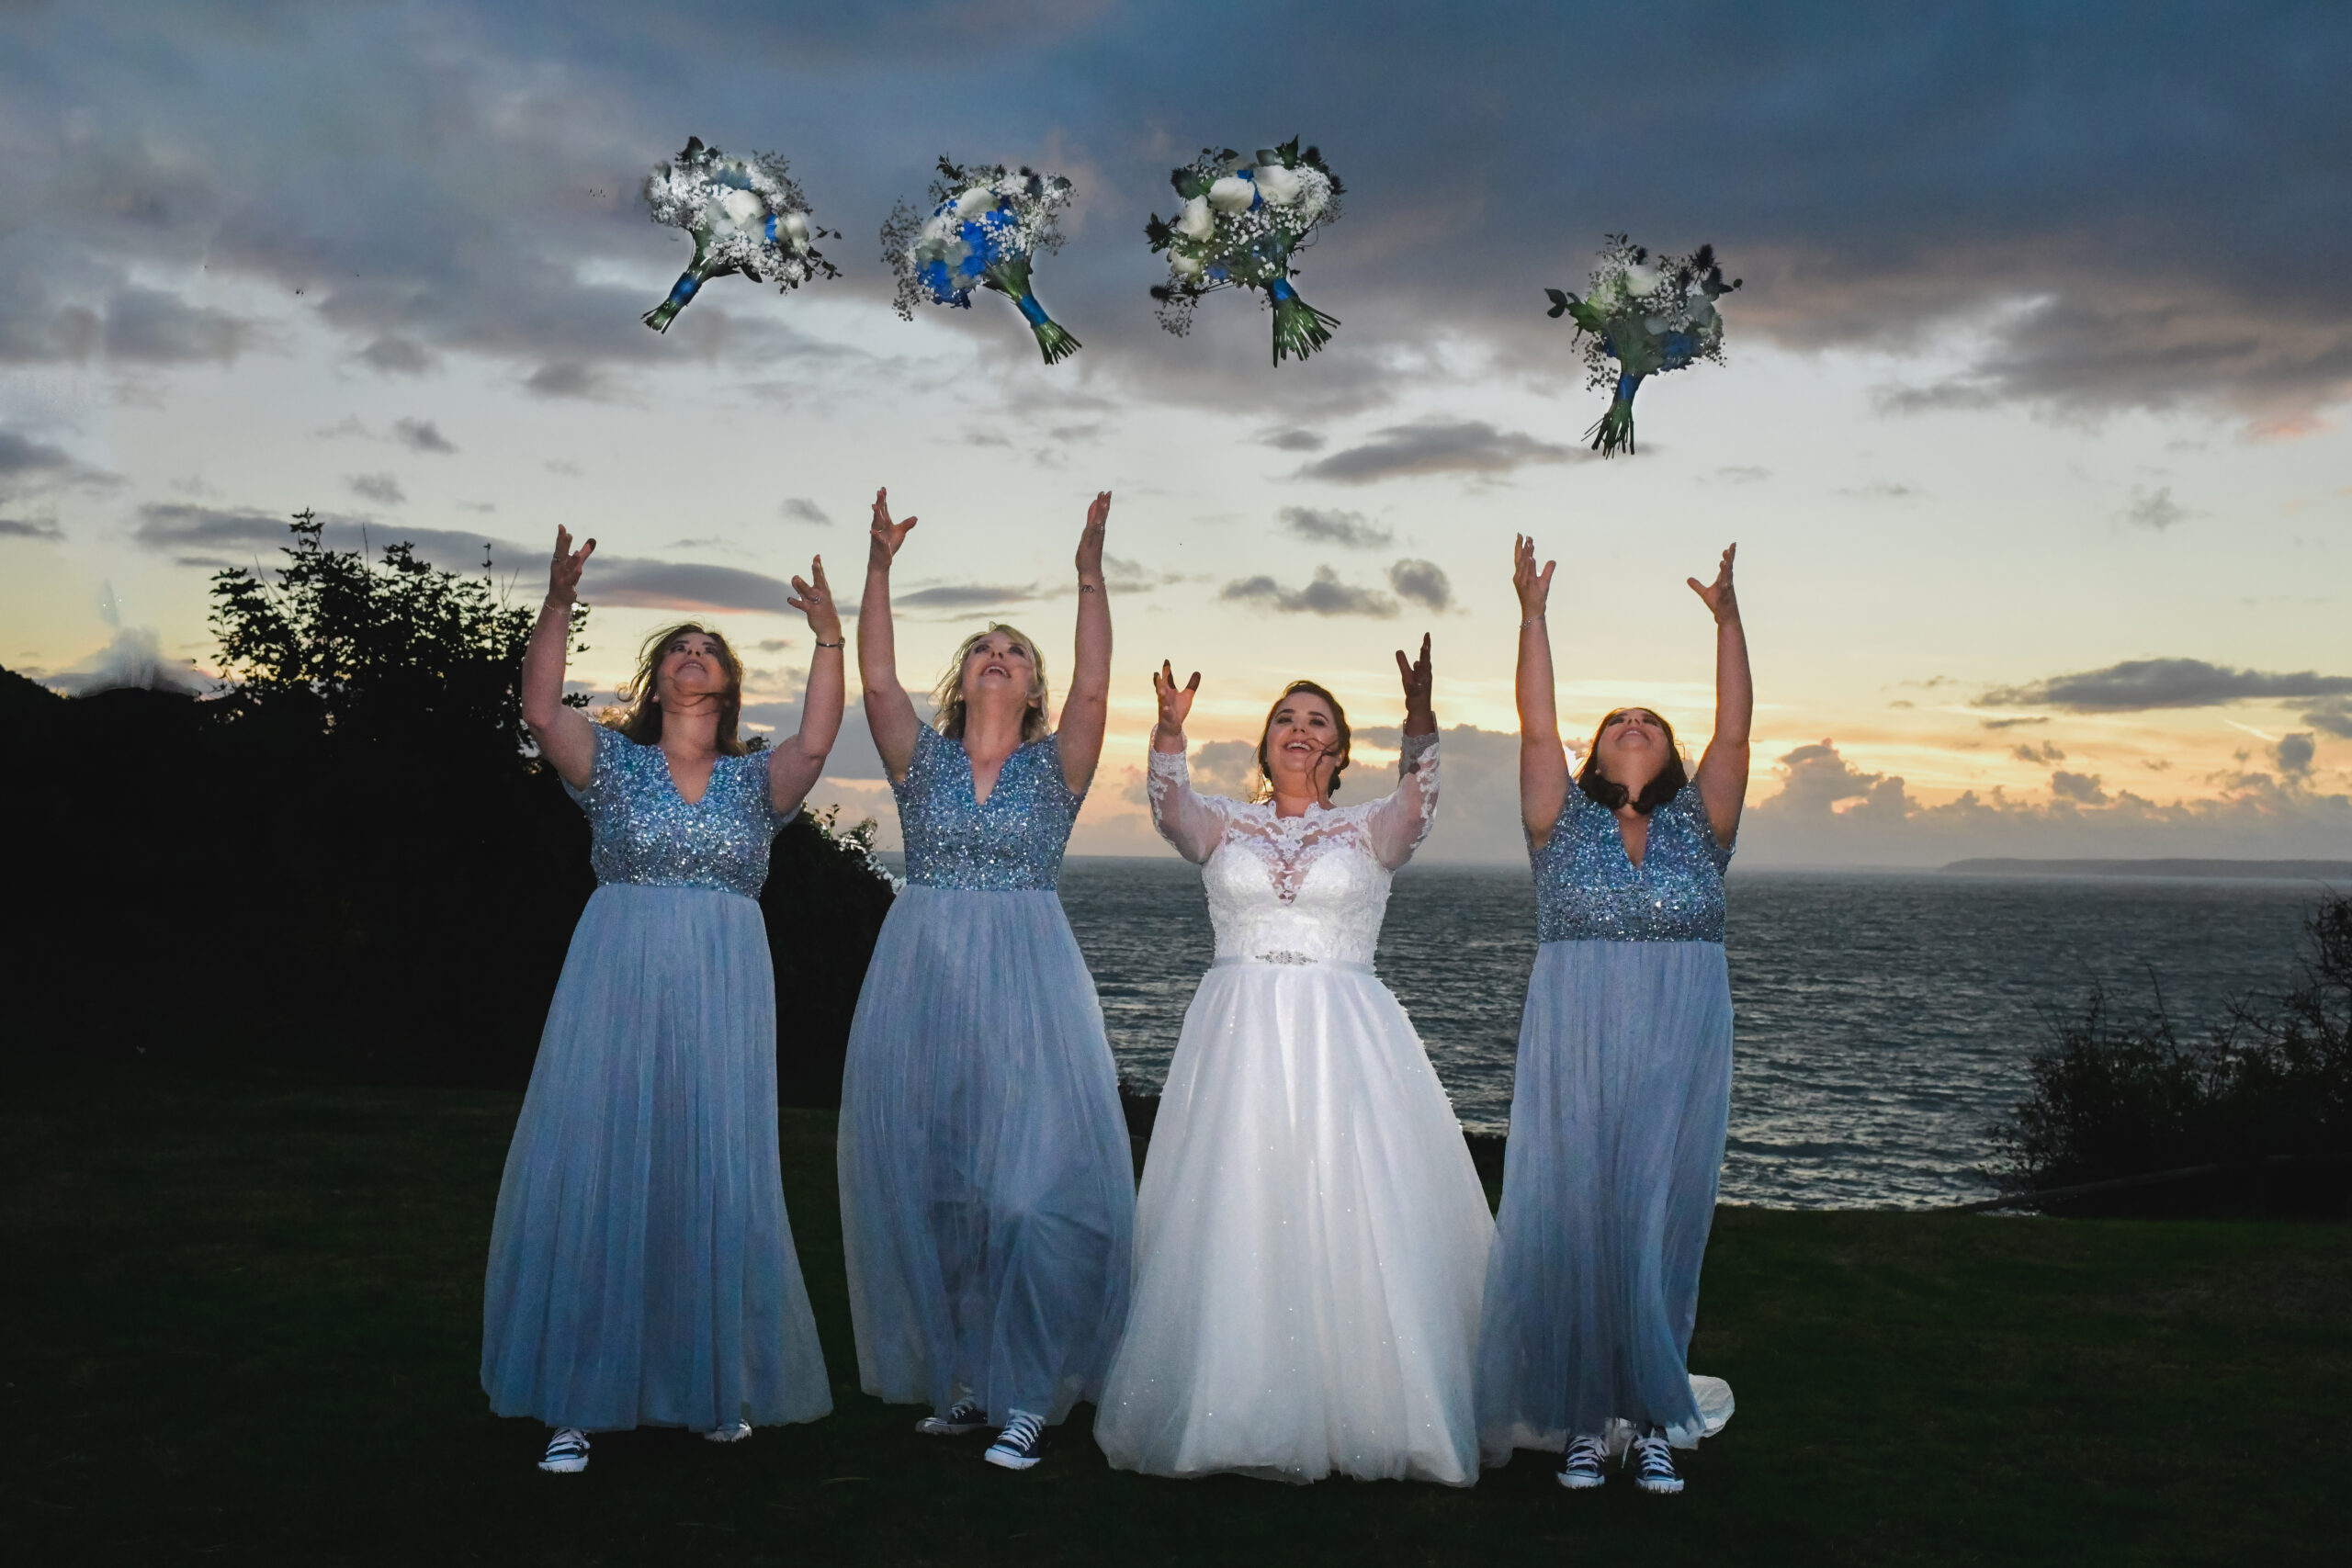 Sunset Wedding Photography at Polhawn Fort the Bridemaids throwing the Bouquet Award winning Wedding Photography at Polhawn Fort